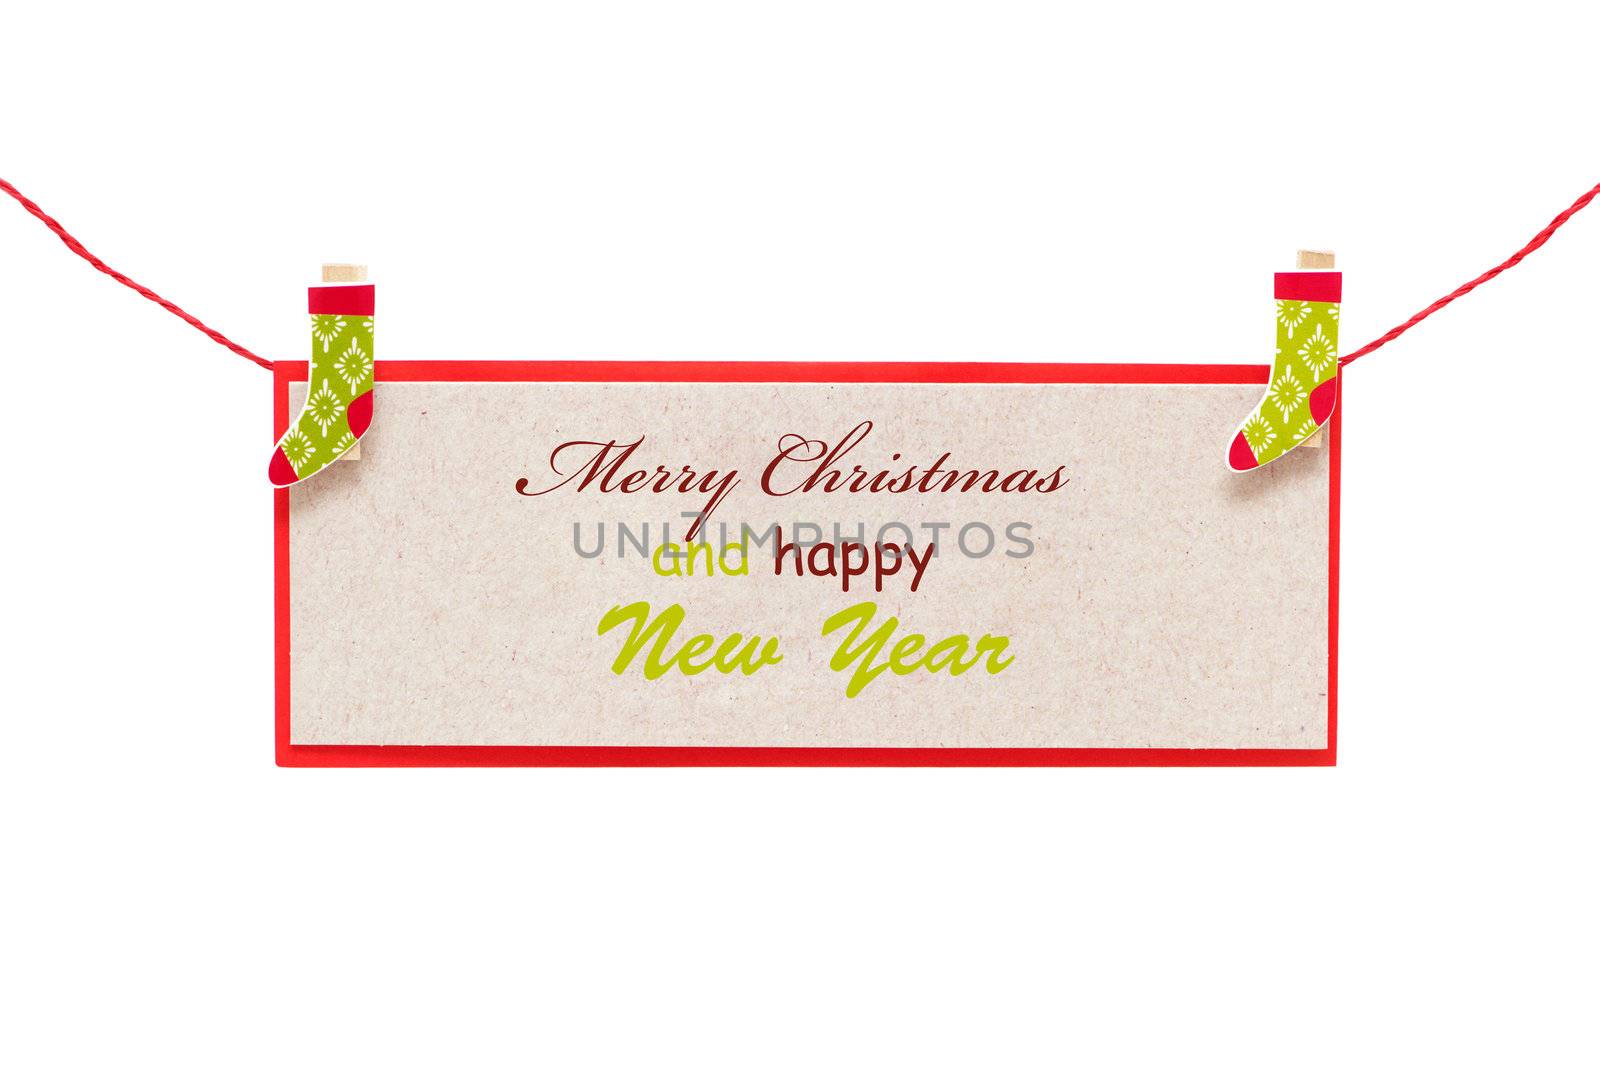 Christmas greeting card with text